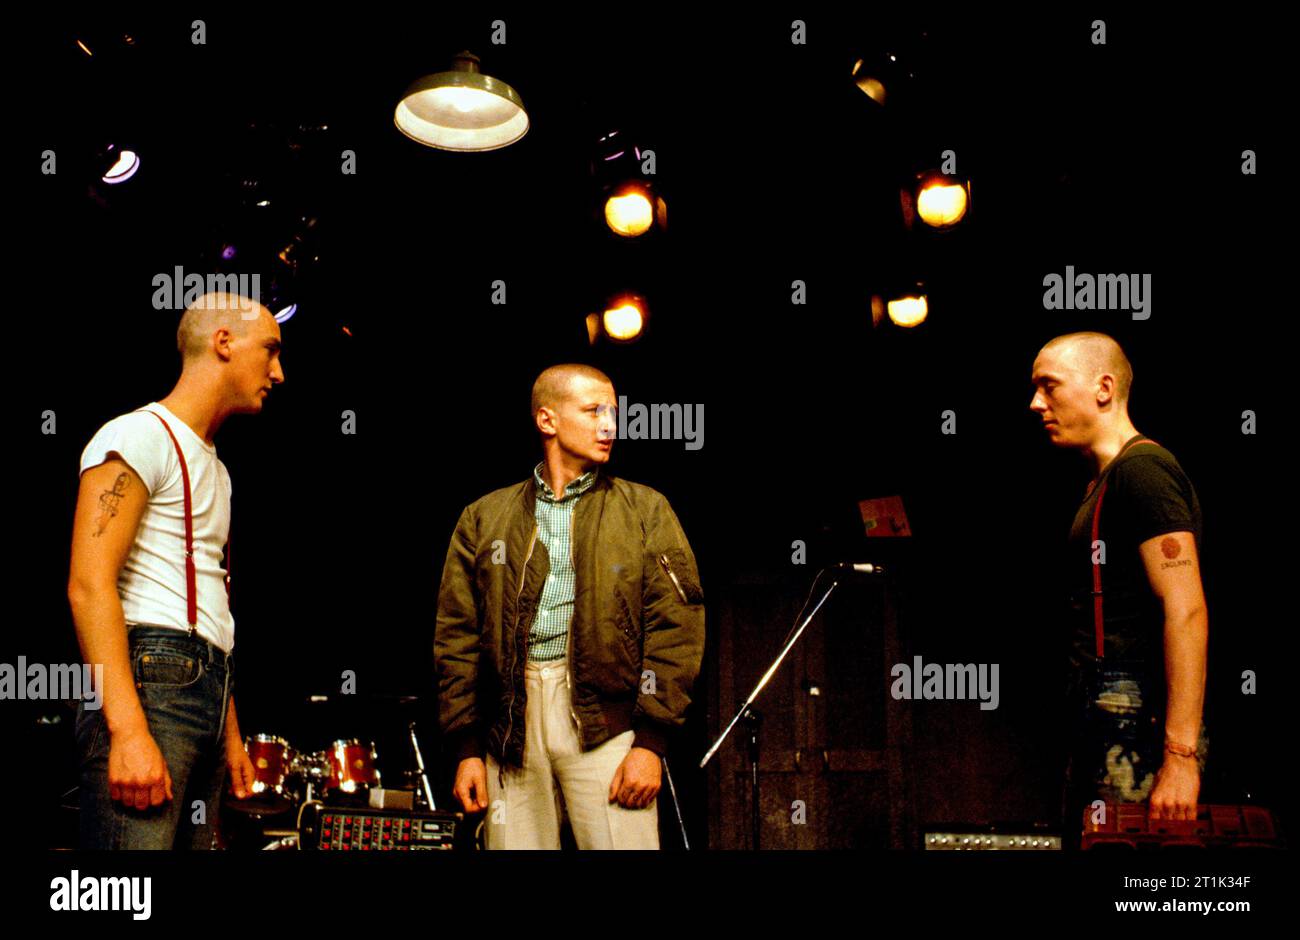 l-r: Dorian Healy (Landry), Peter Lovstrom (Swells), Robin Hayter (Napper) in OI FOR ENGLAND by Trevor Griffiths at the Theatre Upstairs, Royal Court Theatre, London SW1  08/06/1982  lyrics: Trevor Griffiths  music: Andy Roberts & the band  design: Chris Townsend  lighting: Robin Myerscough-Walker  musical director: Andy Roberts  director: Antonia Bird Stock Photo